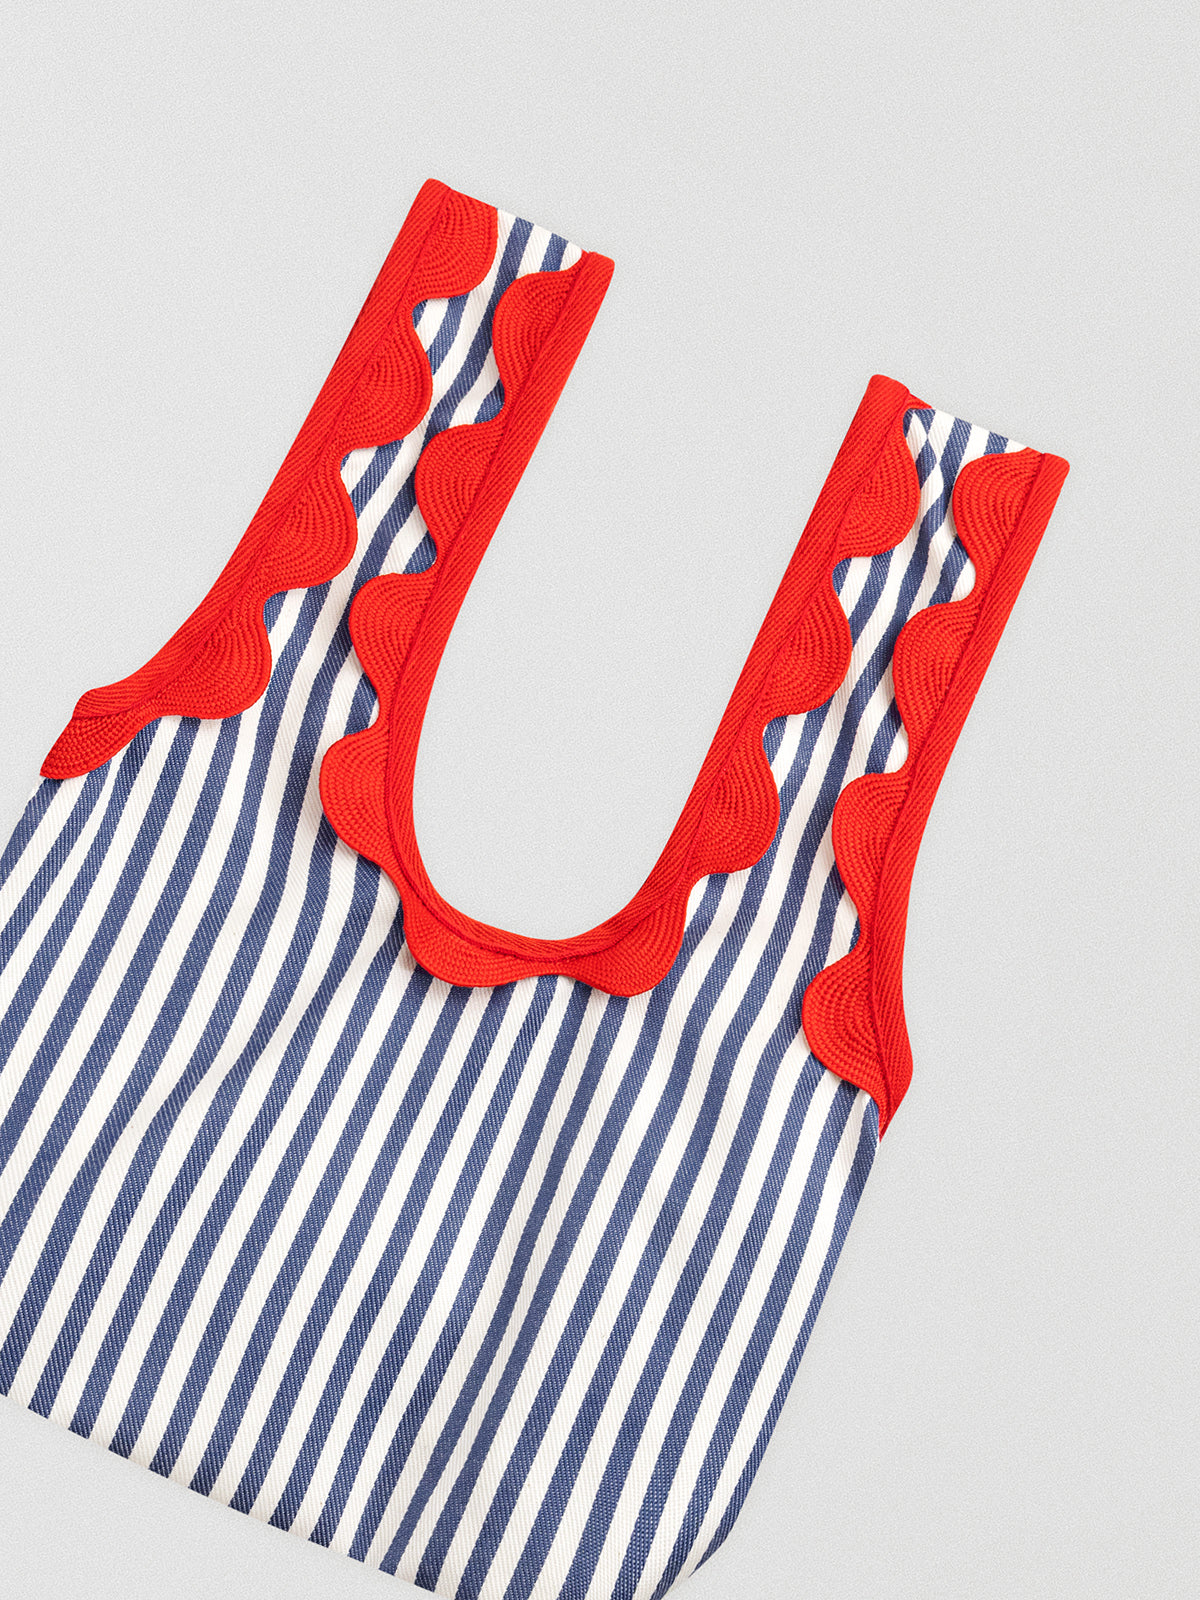 Blue and white striped mini bag with red undulina detail on handles